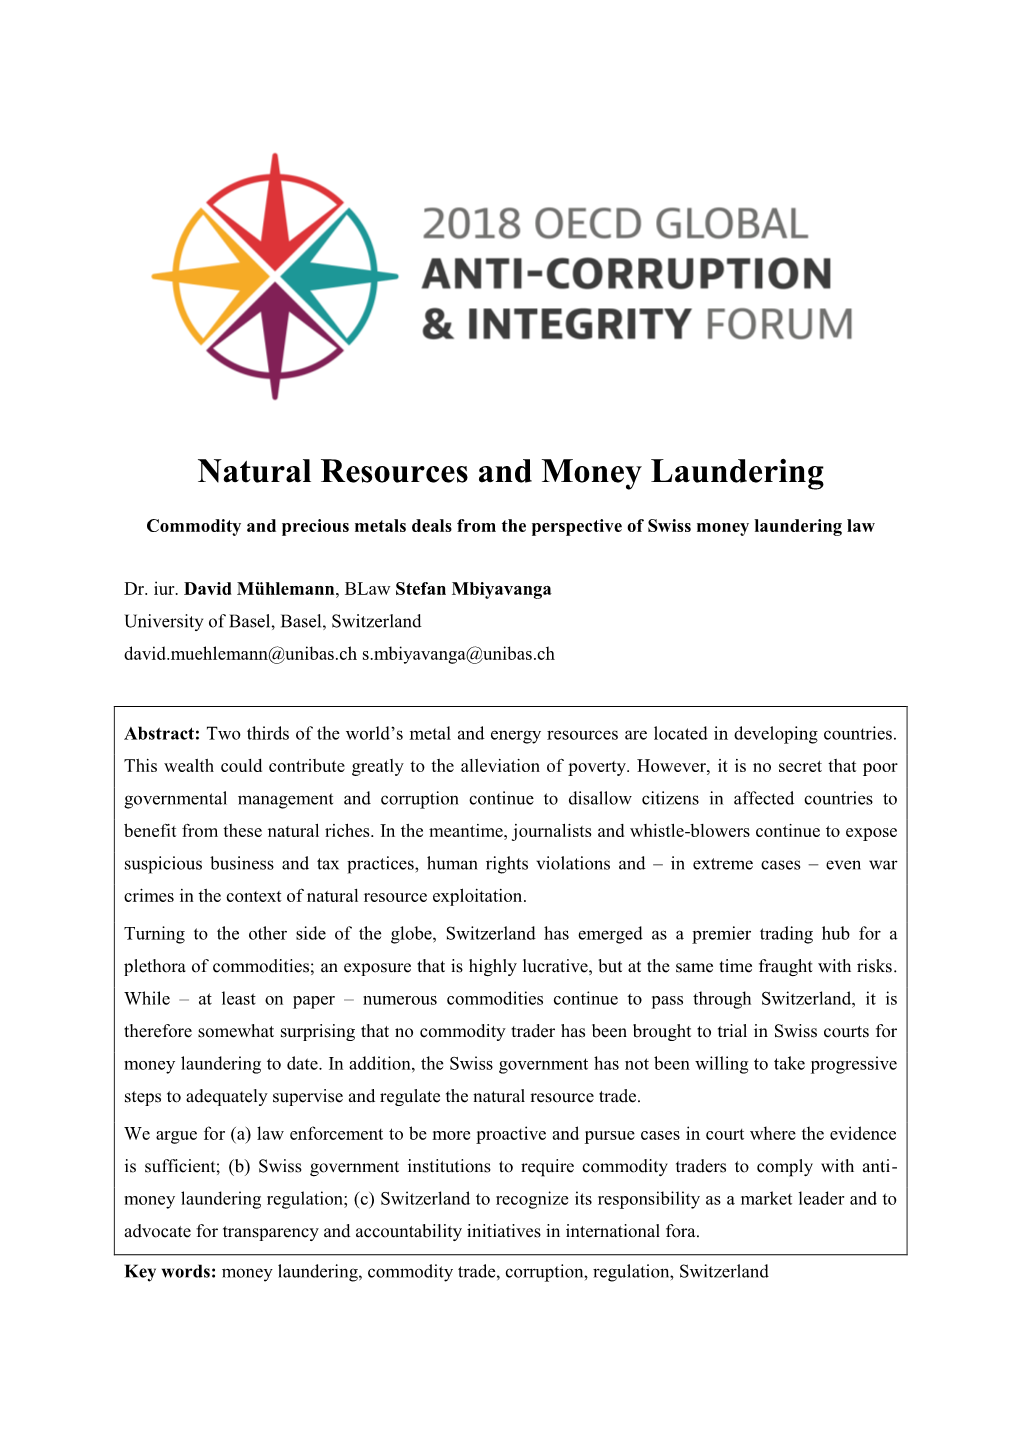 Natural Resources and Money Laundering